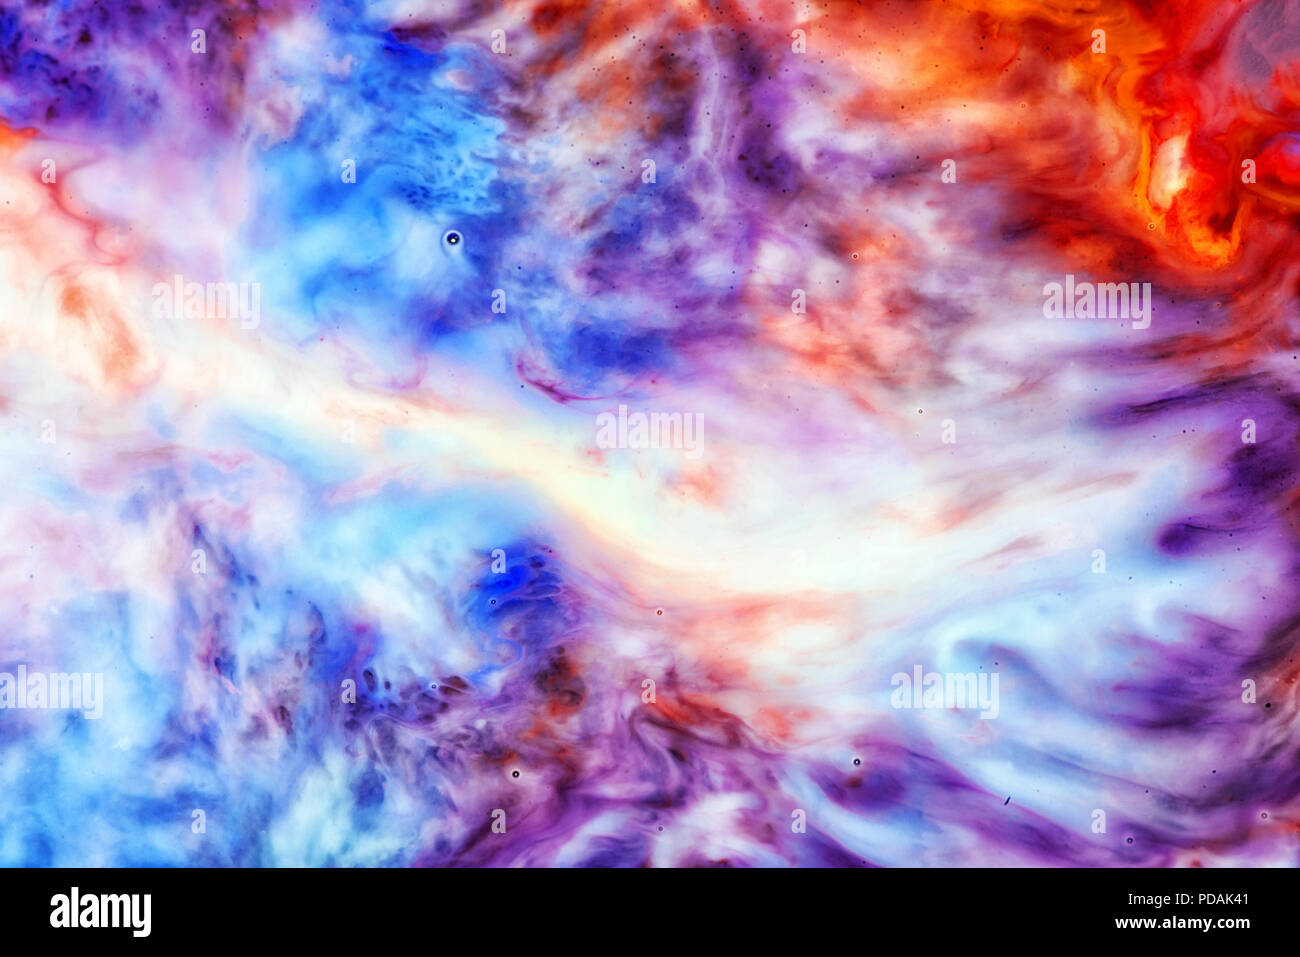 Abstract liquid milk flowing pattern like nebulae in the universe with different colours of white, blue, red and pink Stock Photo